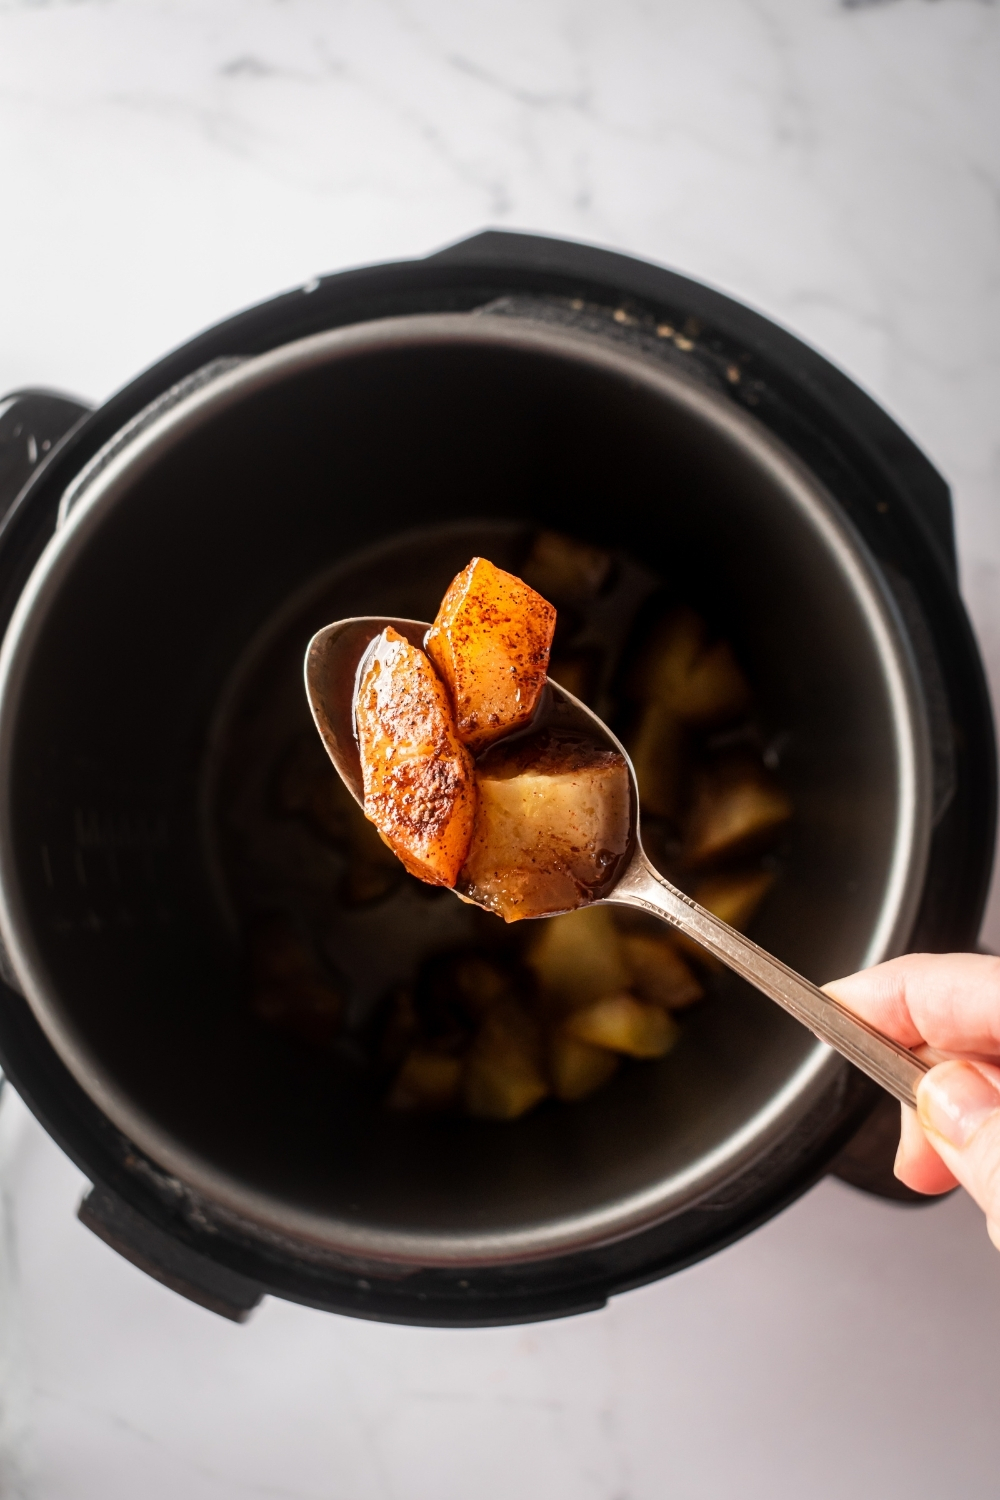 A spoon with two slices of apple on it being held over an instant pot filled with apple butter.